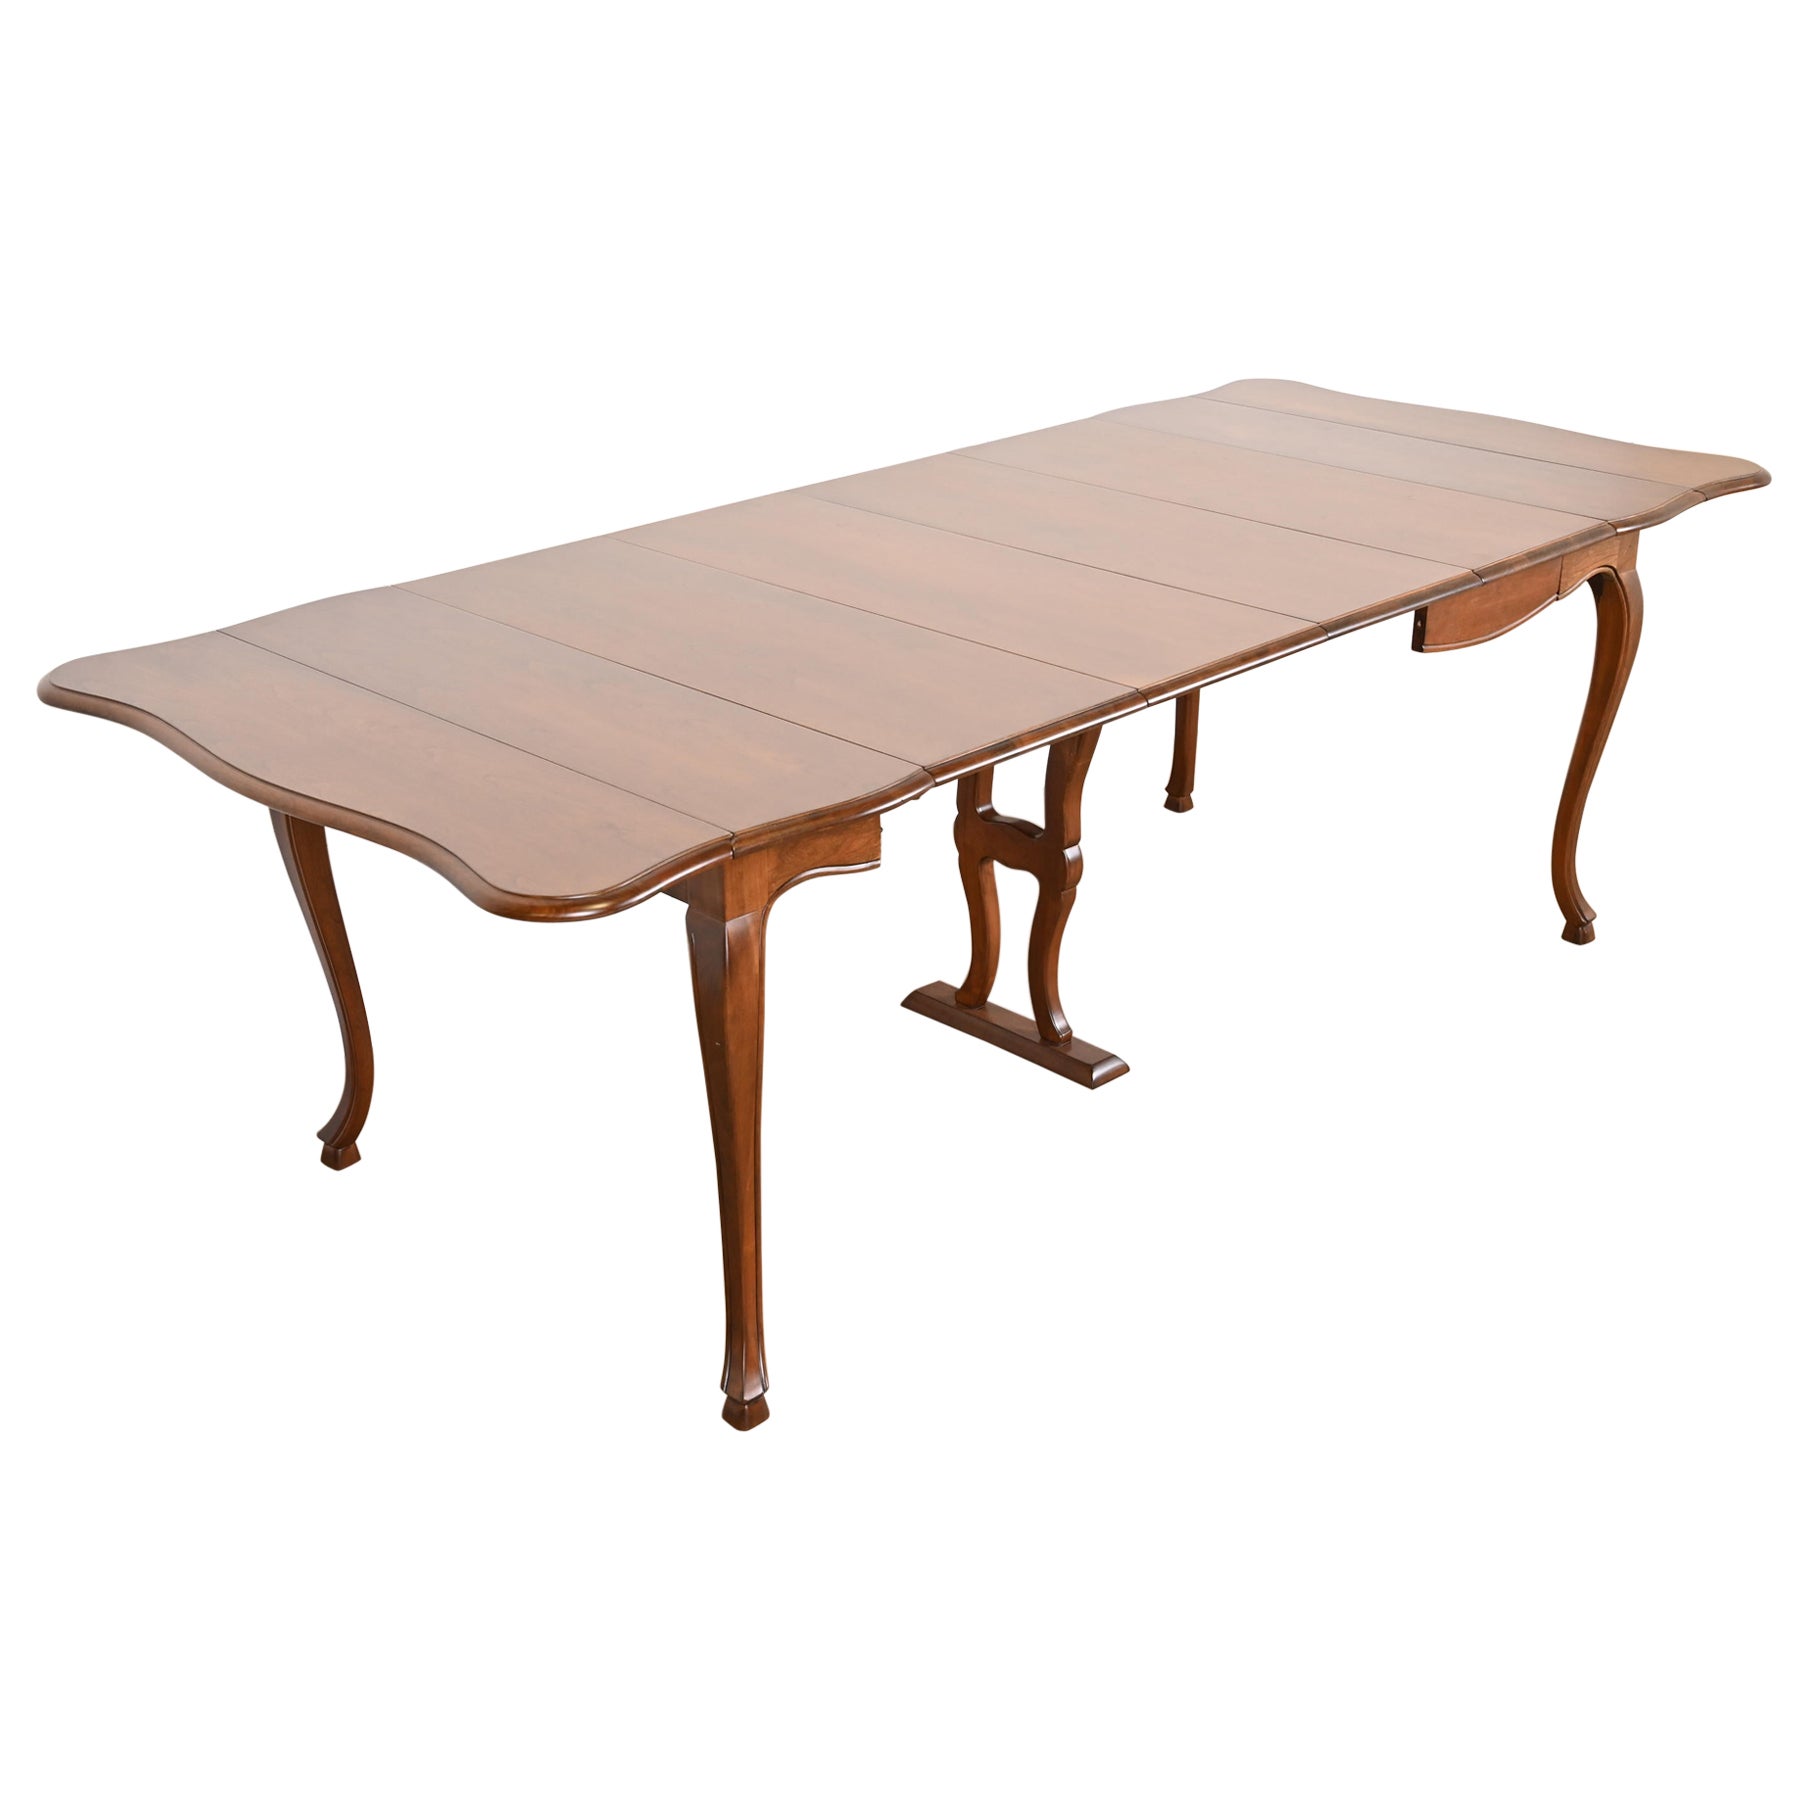 John Widdicomb French Provincial Cherry Wood Dining Table, Newly Refinished For Sale